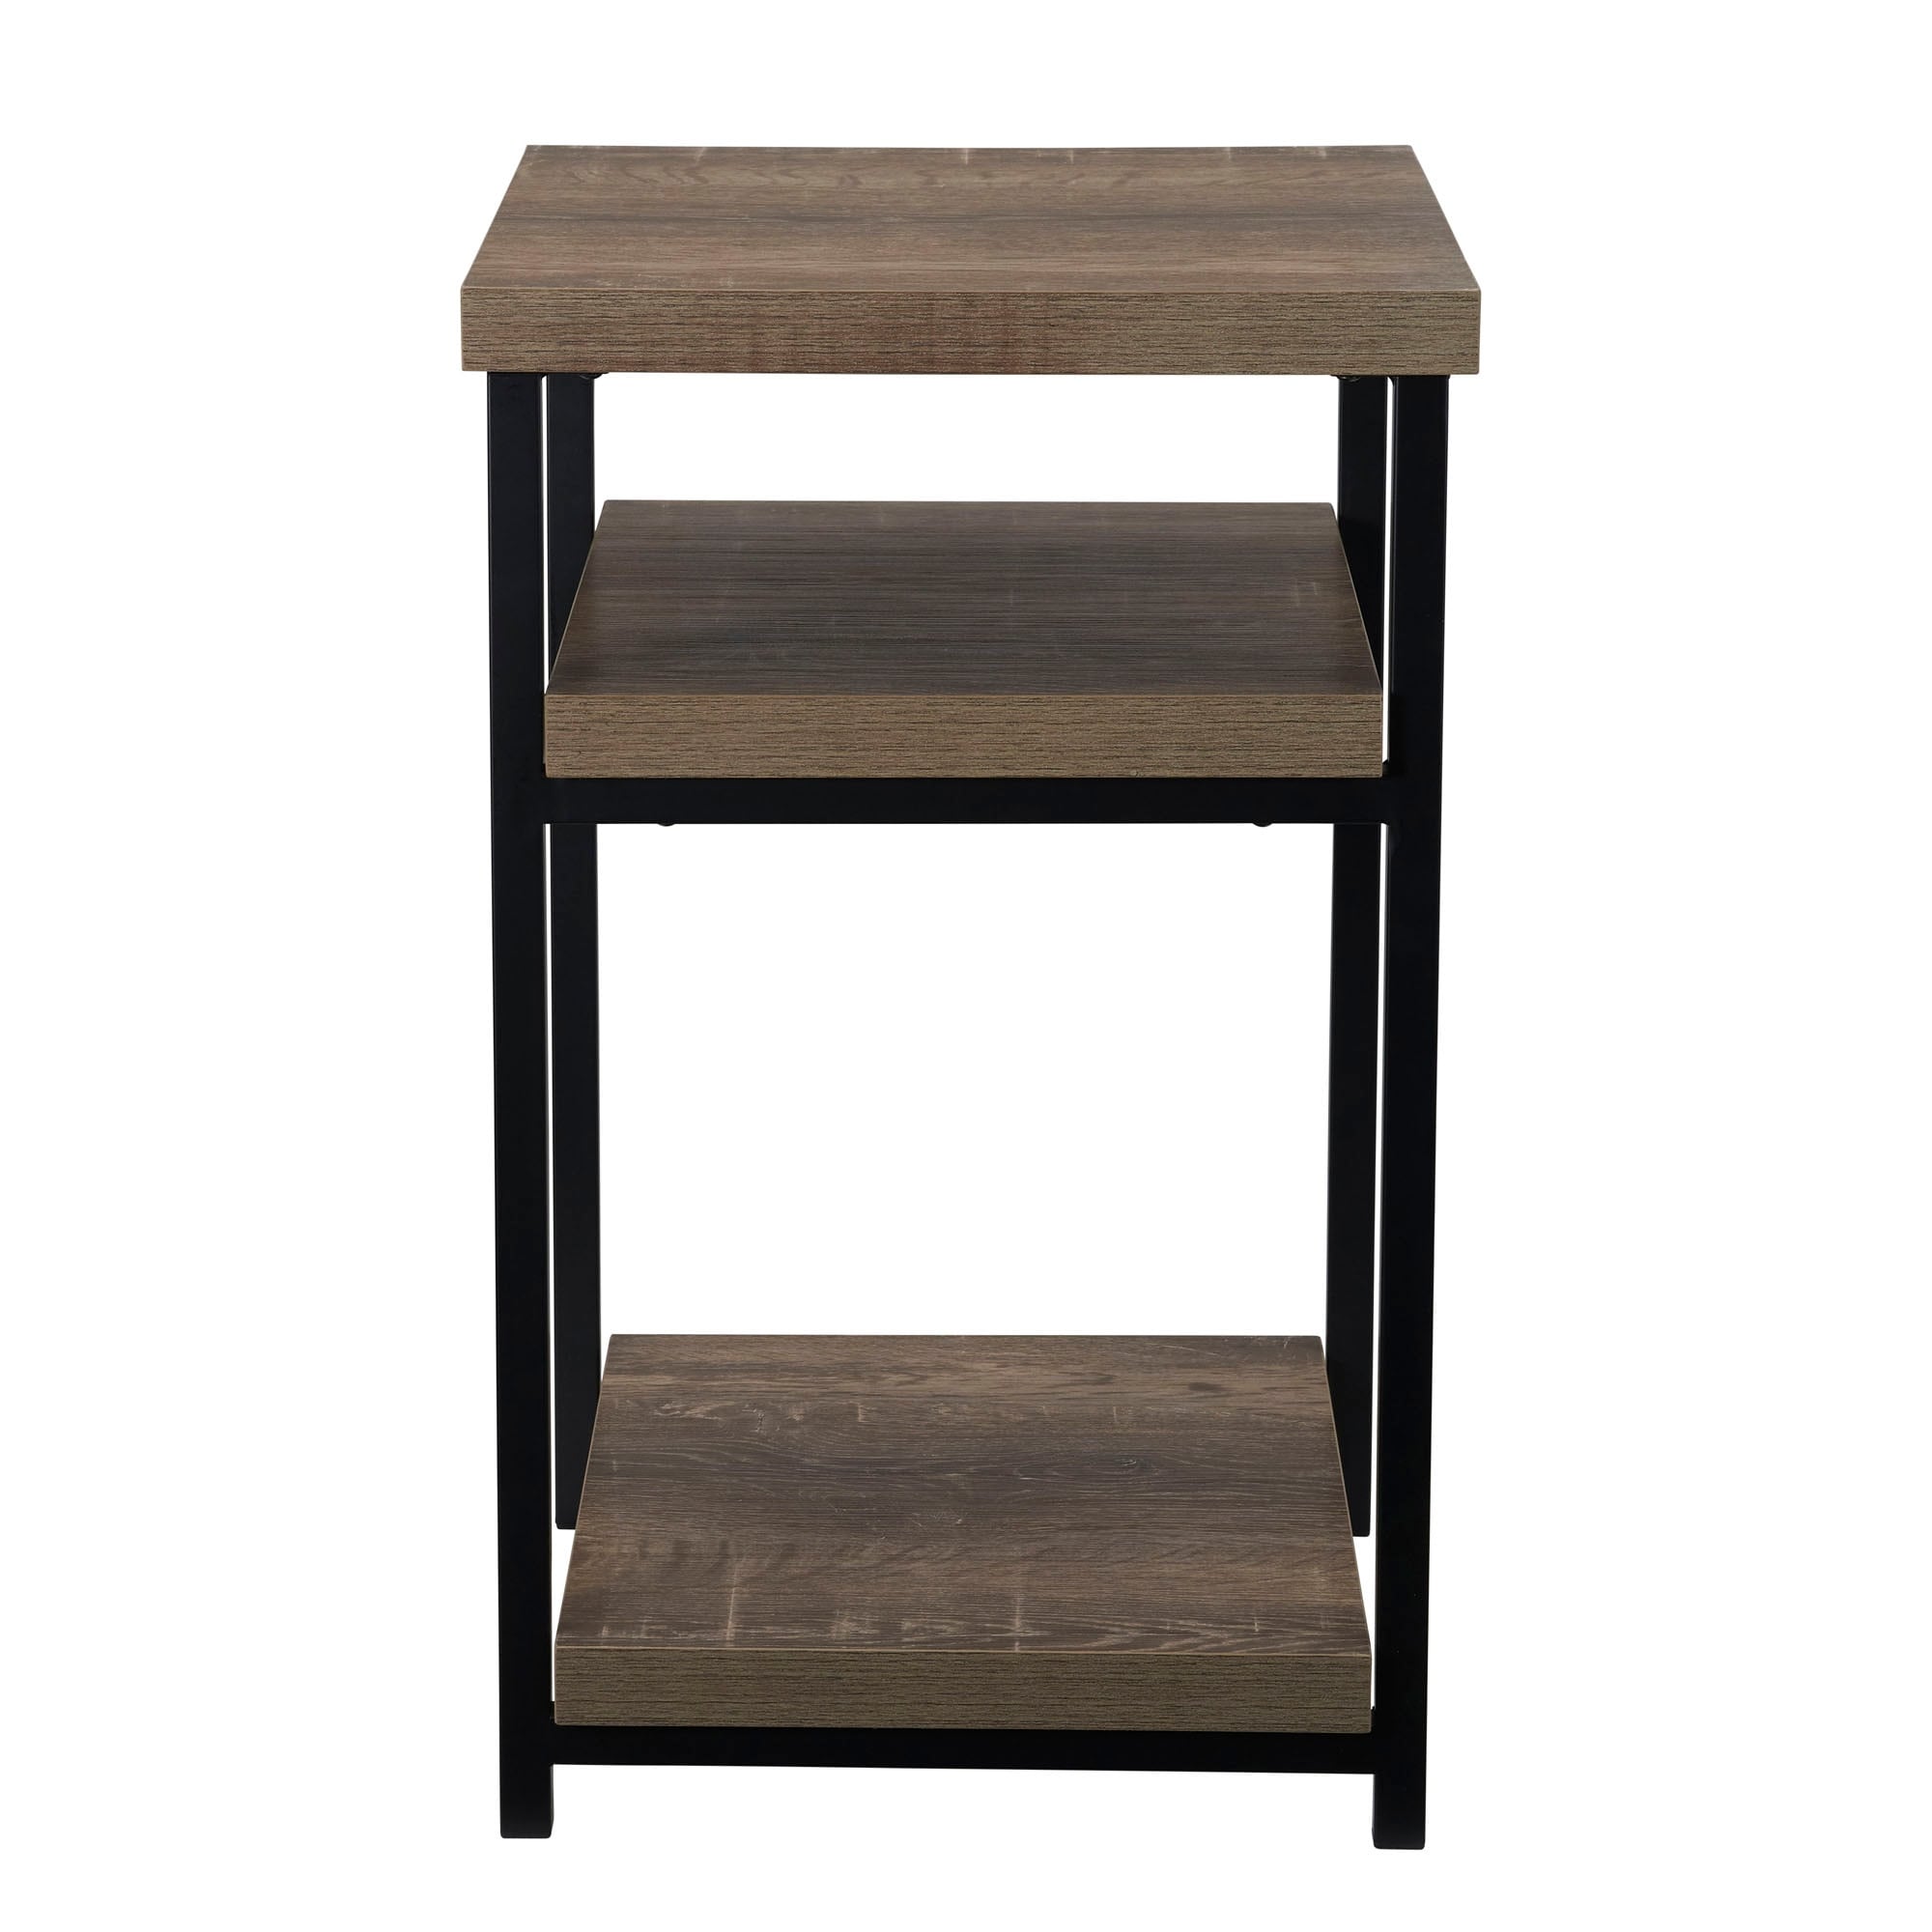  Household Essentials Square Wooden Side Table/End Table With  Storage Shelf, Ashwood : Home & Kitchen